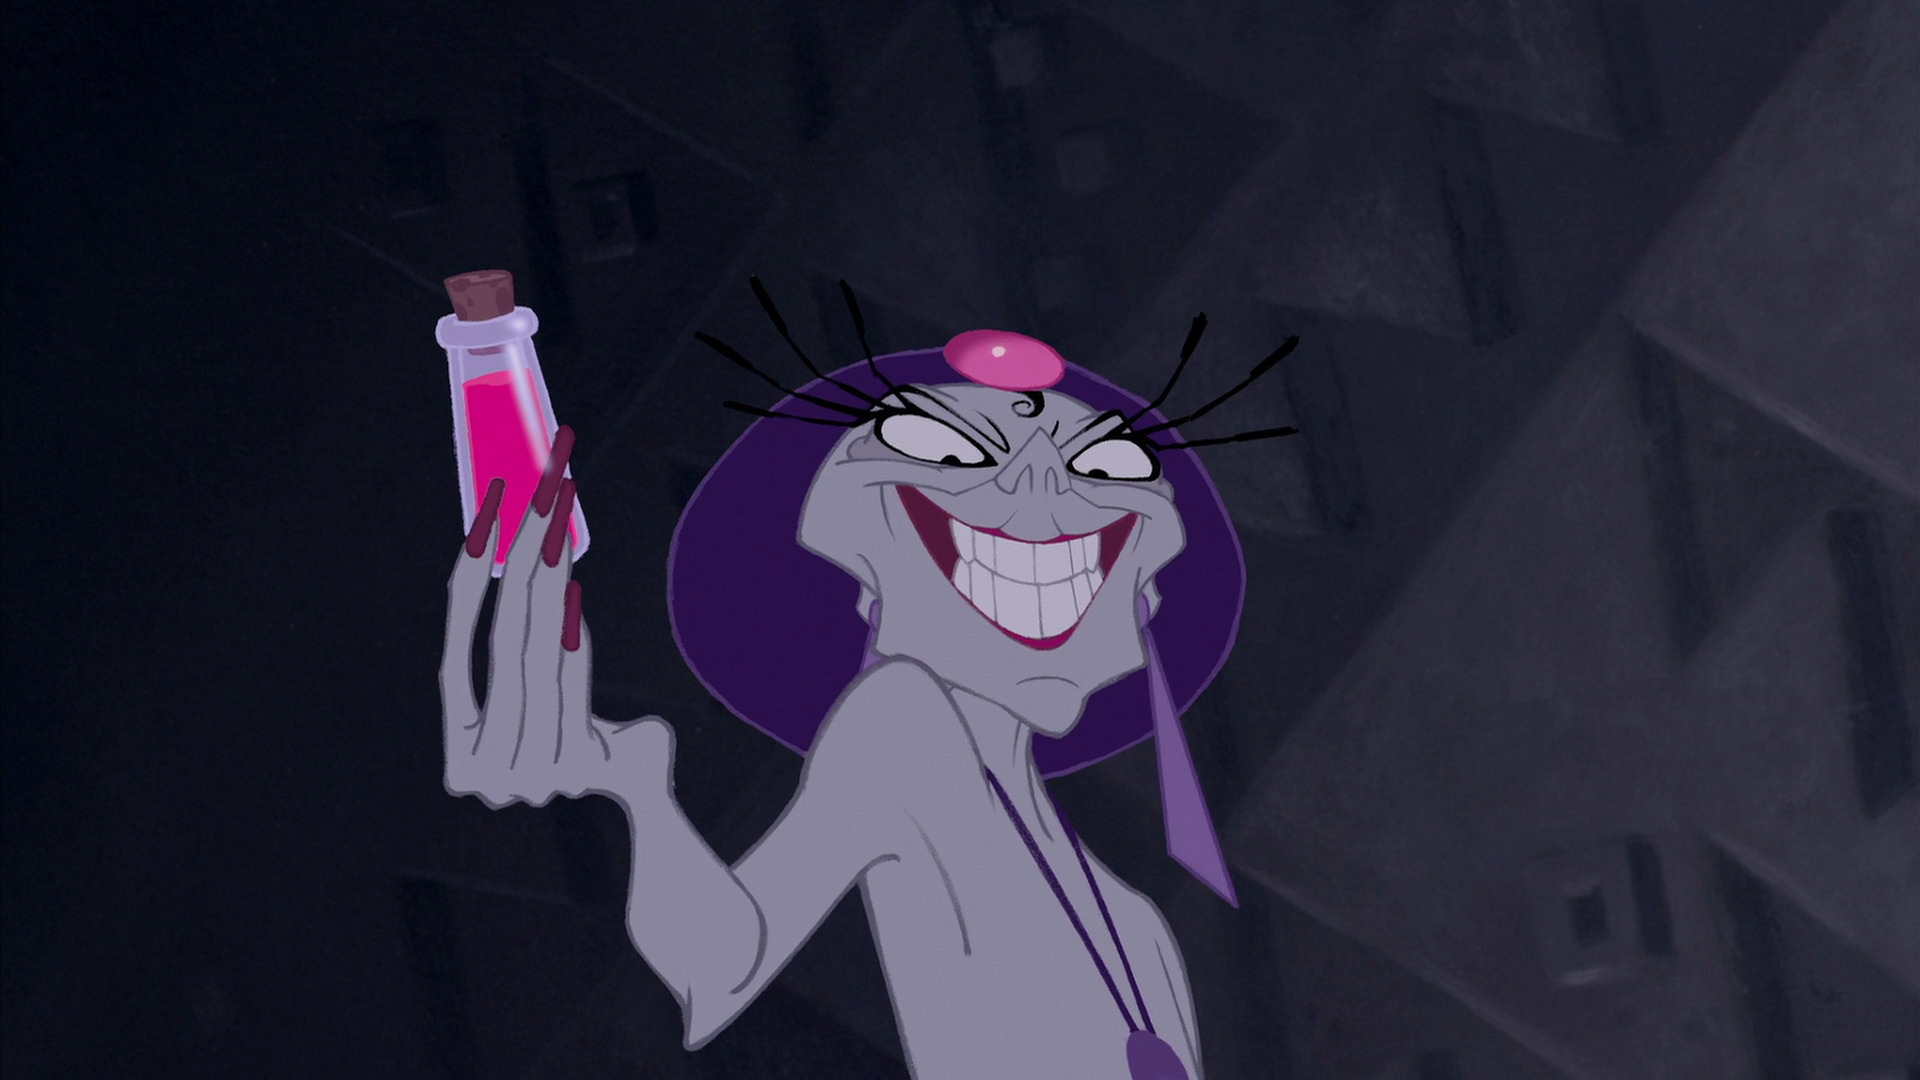 If Yzma from The Emperor's New Groove was an official DP Villain, wher...